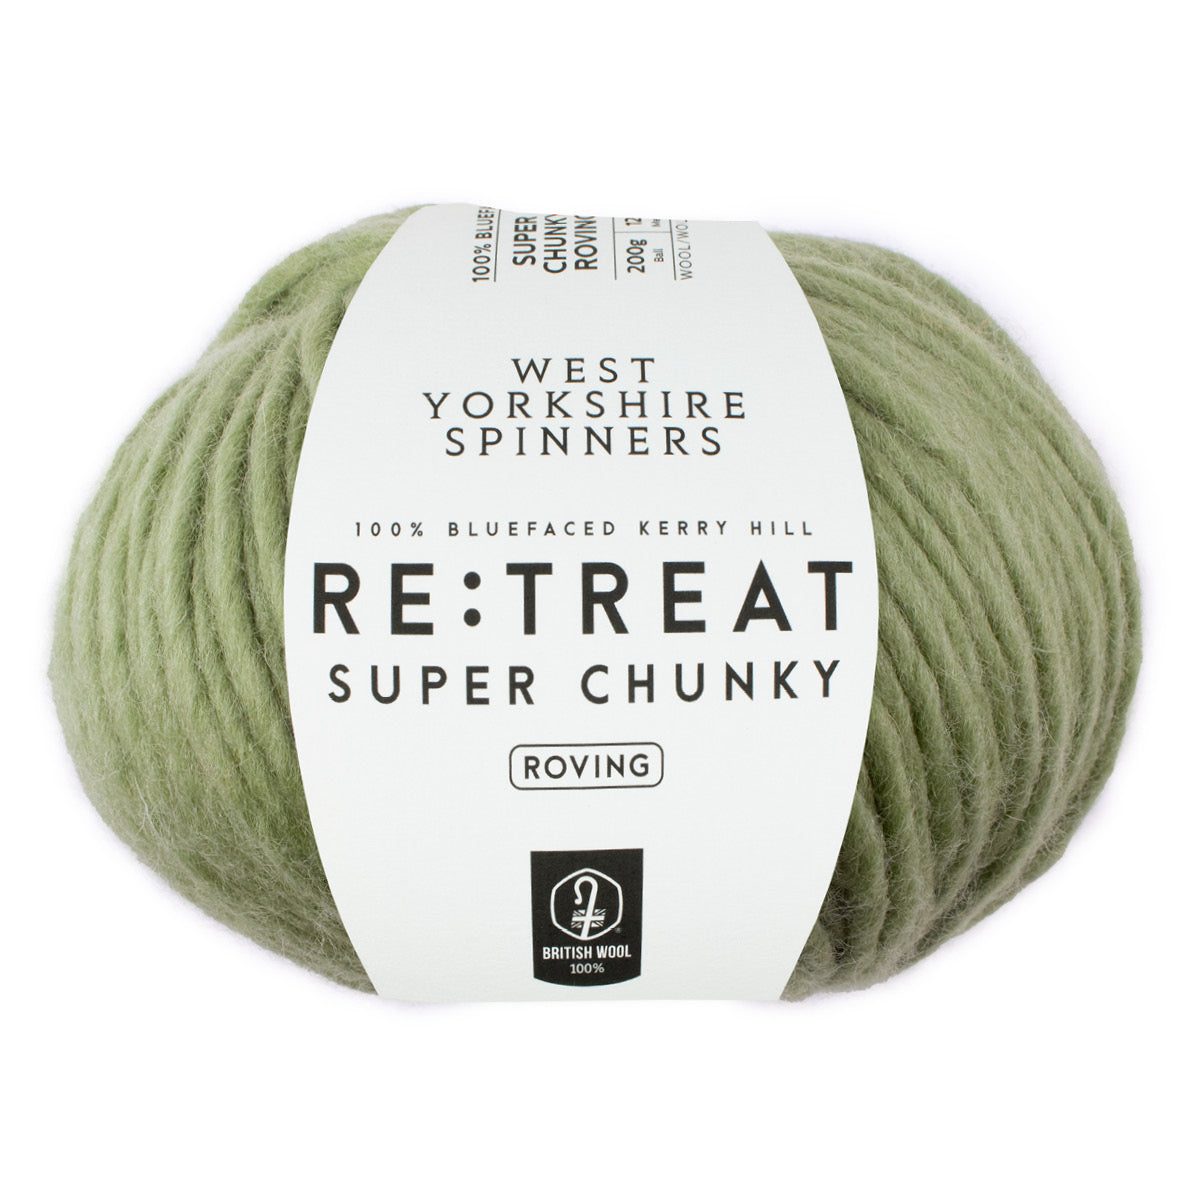 West Yorkshire Spinners Re:Treat Super Chunky Roving